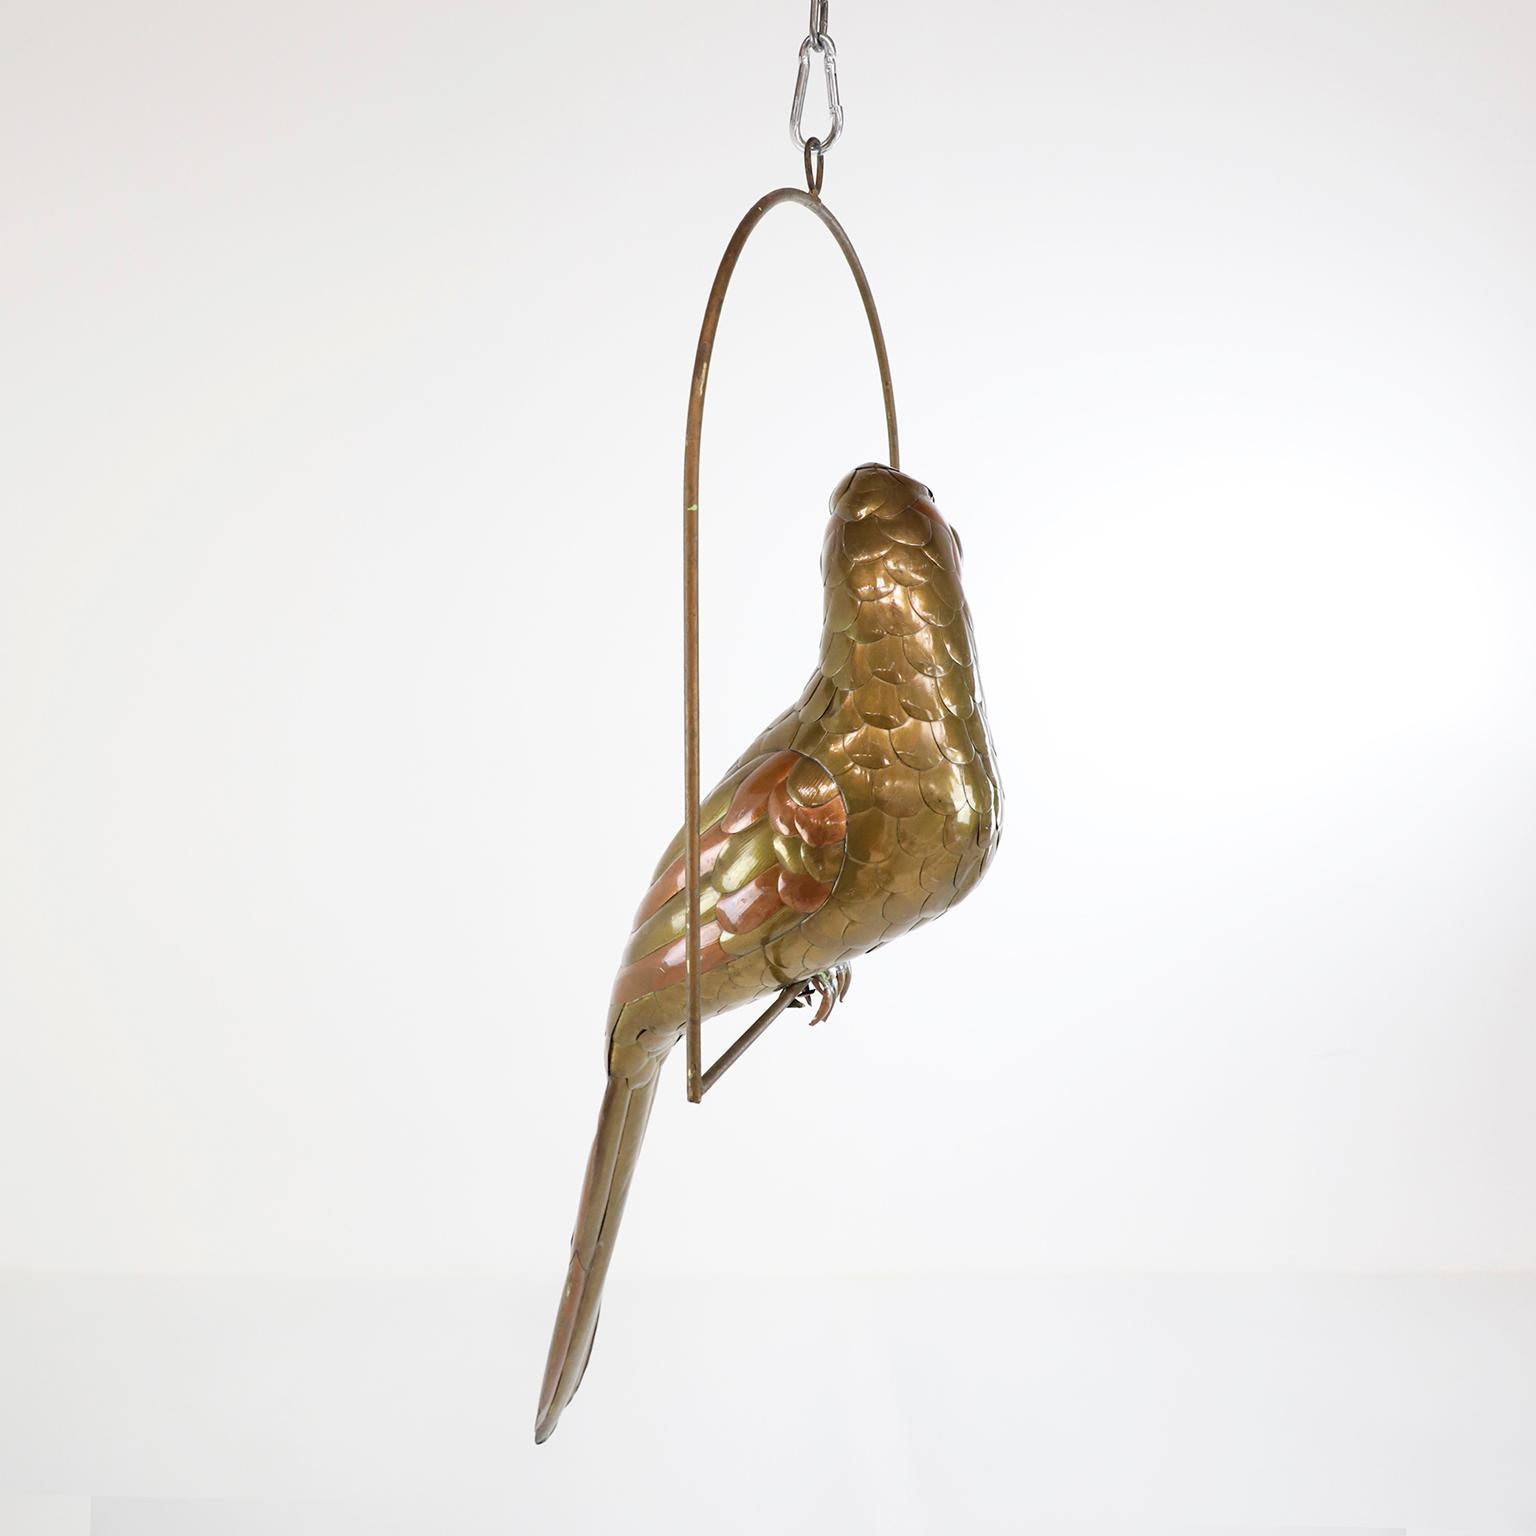 Copper, brass and aluminium Parrot on a hoop hanging stand by Sergio Bustamante, circa 1960. presents some damage to the head and tail.

Sergio Bustamante is a Mexican Artist and sculptor. He began with paintings and papier mache figures,